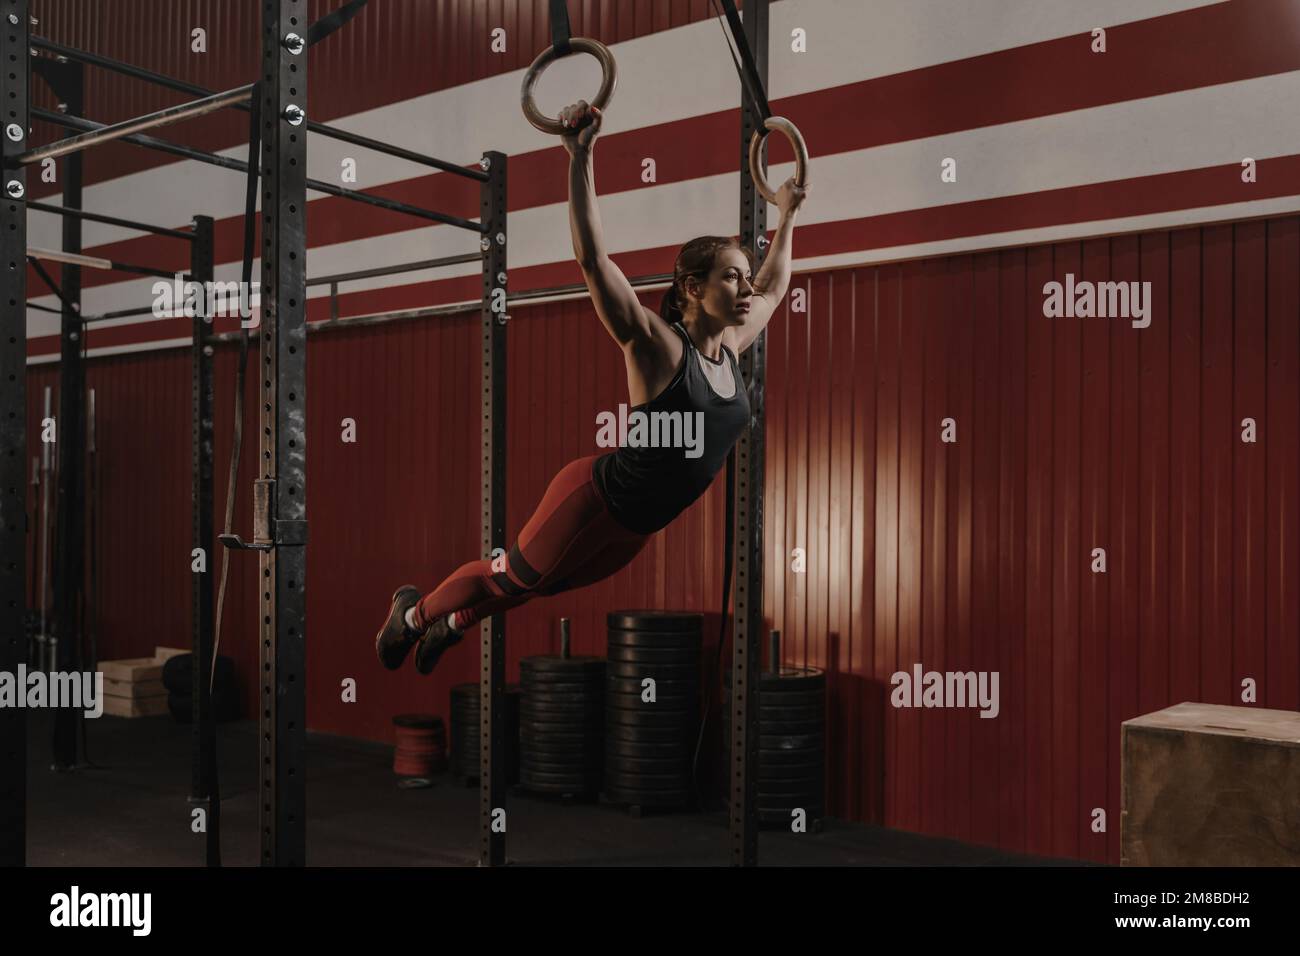 Young crossfit woman swinging on gymnastic rings. Female athlete doing muscle-ups exercise on rings at the gym. Sport motivation concept. Copy space Stock Photo